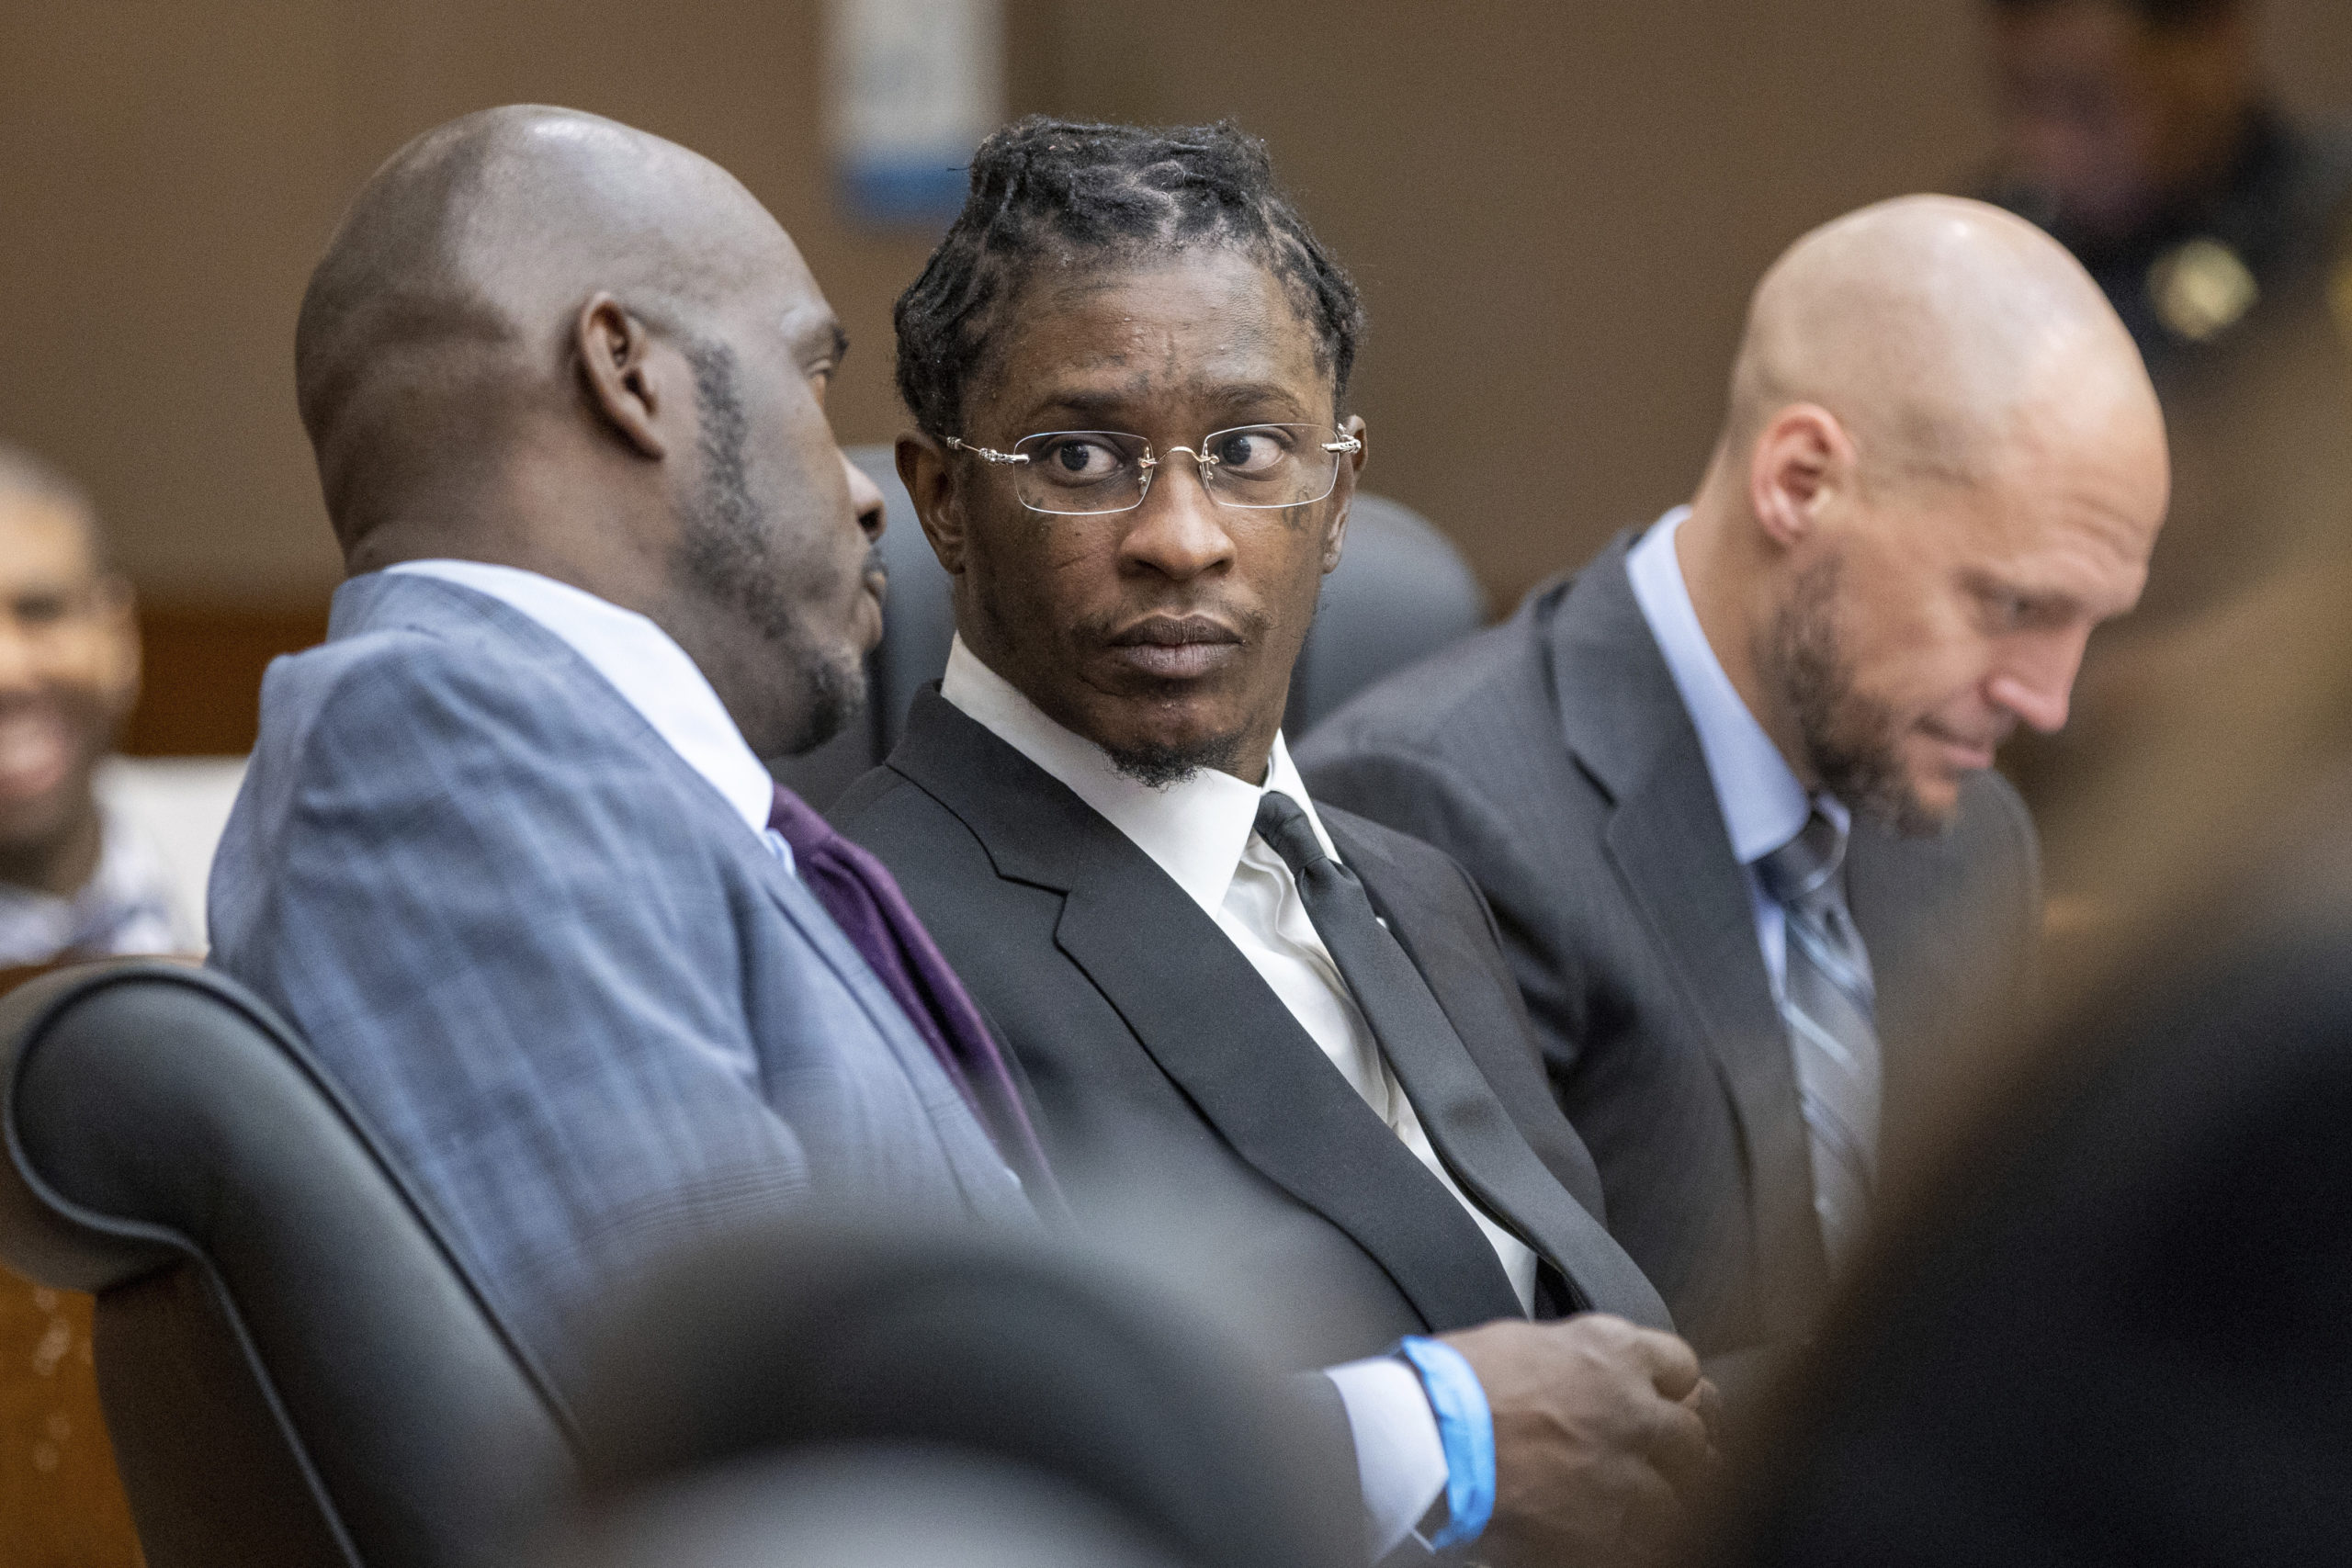 Rapper Young Thug, whose real name is Jeffery Williams, is seen at a hearing in a file photo from December 22, 2022.